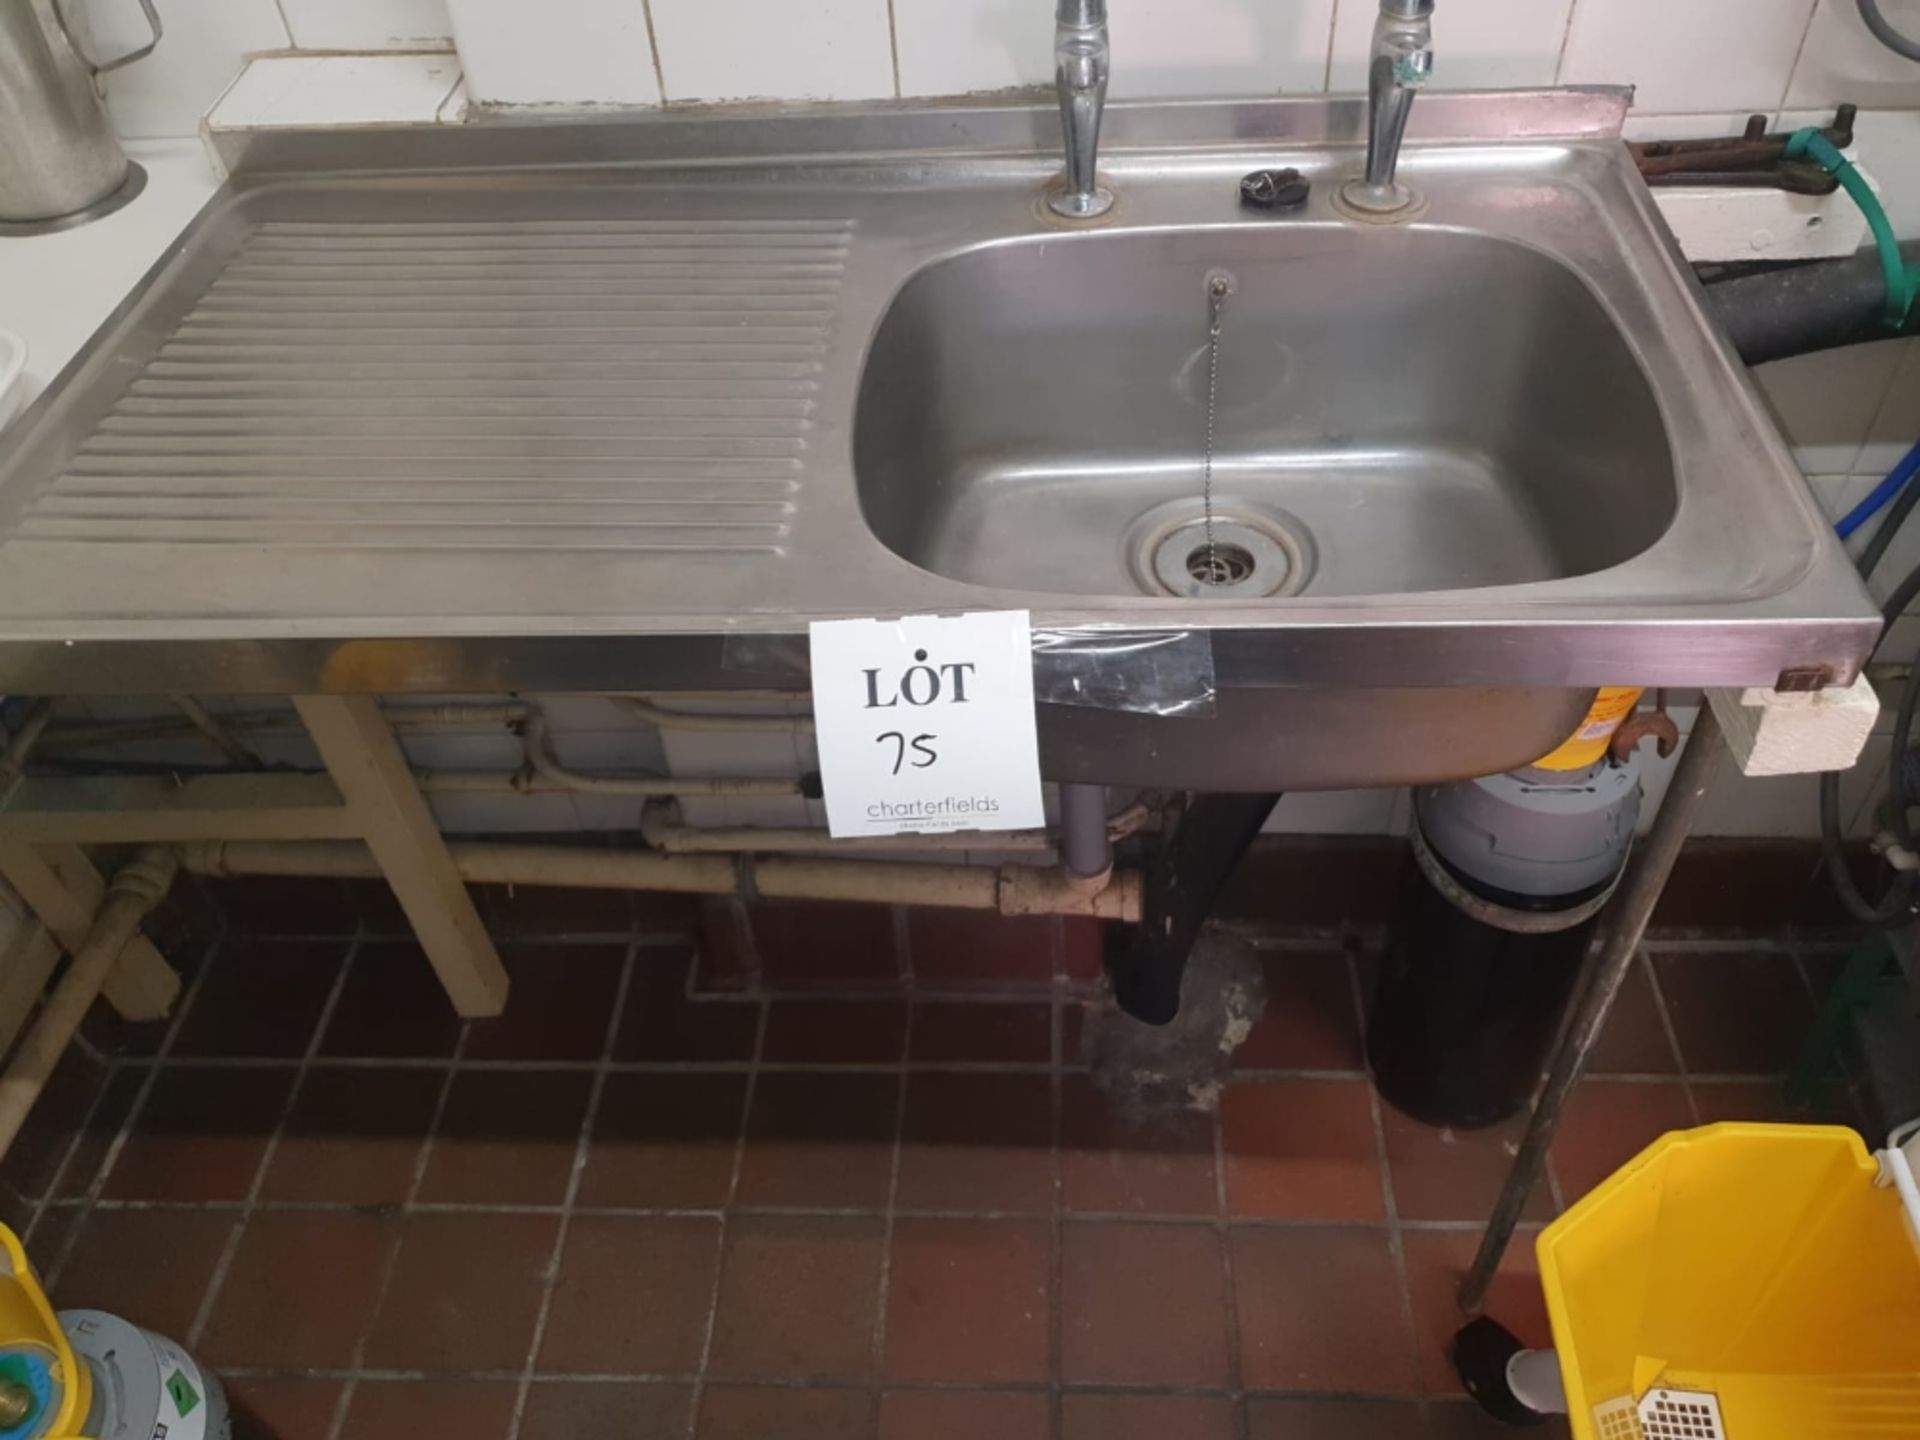 Stainless steel sink NB: This item is located on the 3rd floor of the Building with no lift access